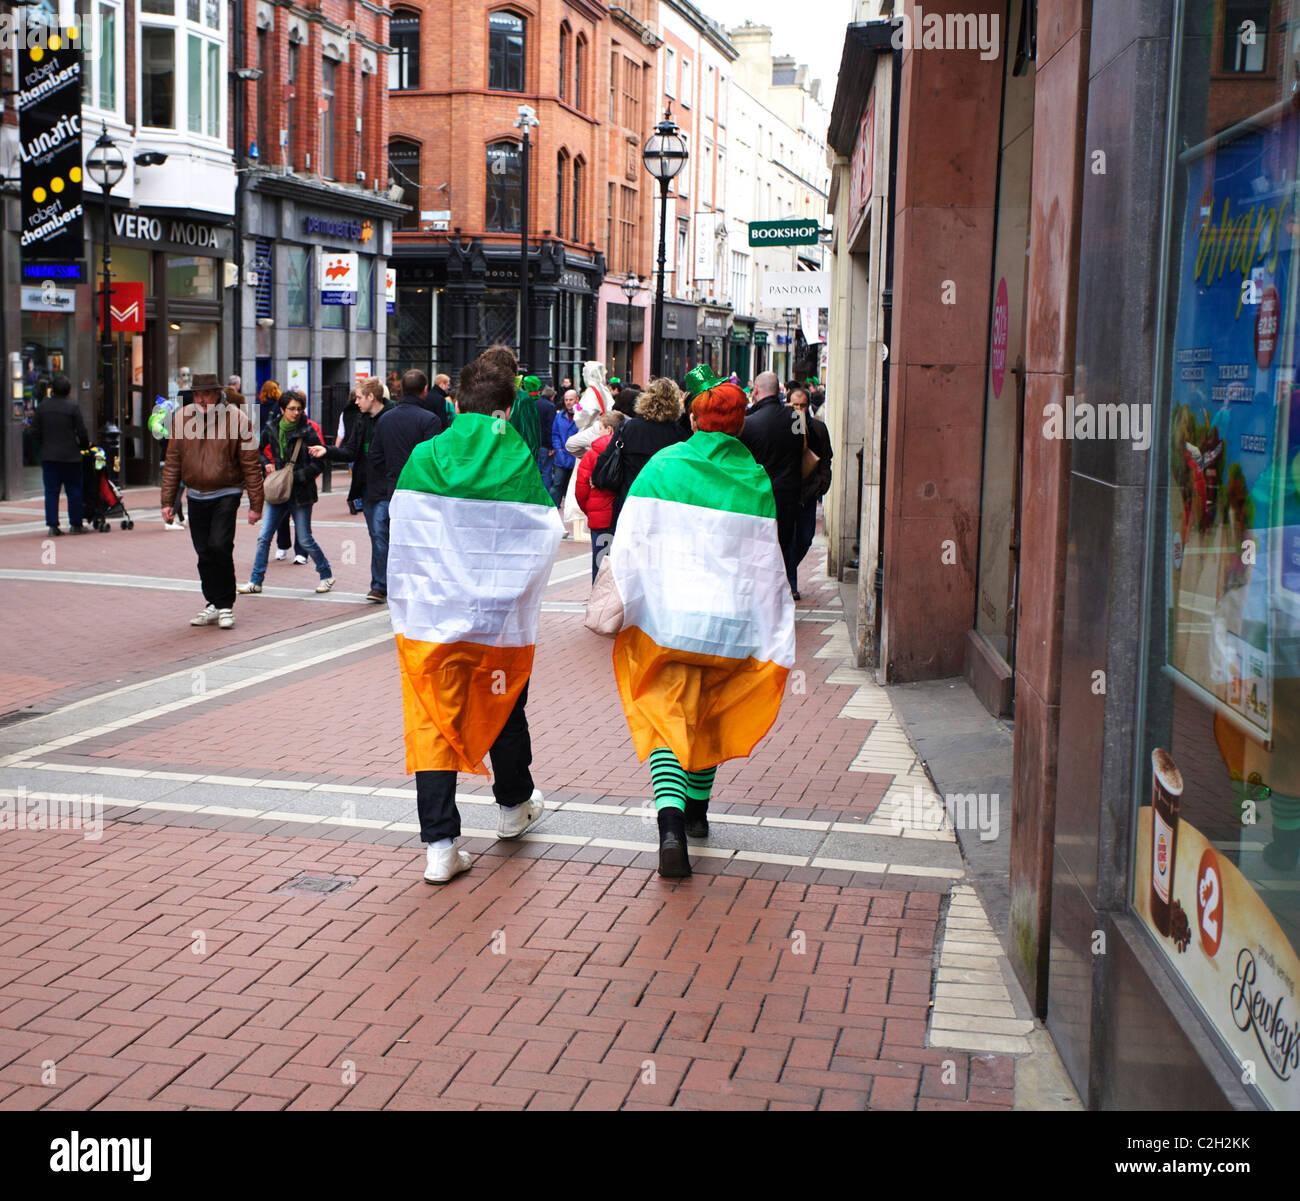 Visitors to the St Patricks Day parade and festival in Dublin, Ireland. Enjoying the 17th of March which is St Patricks Day celebrated every year Stock Photo